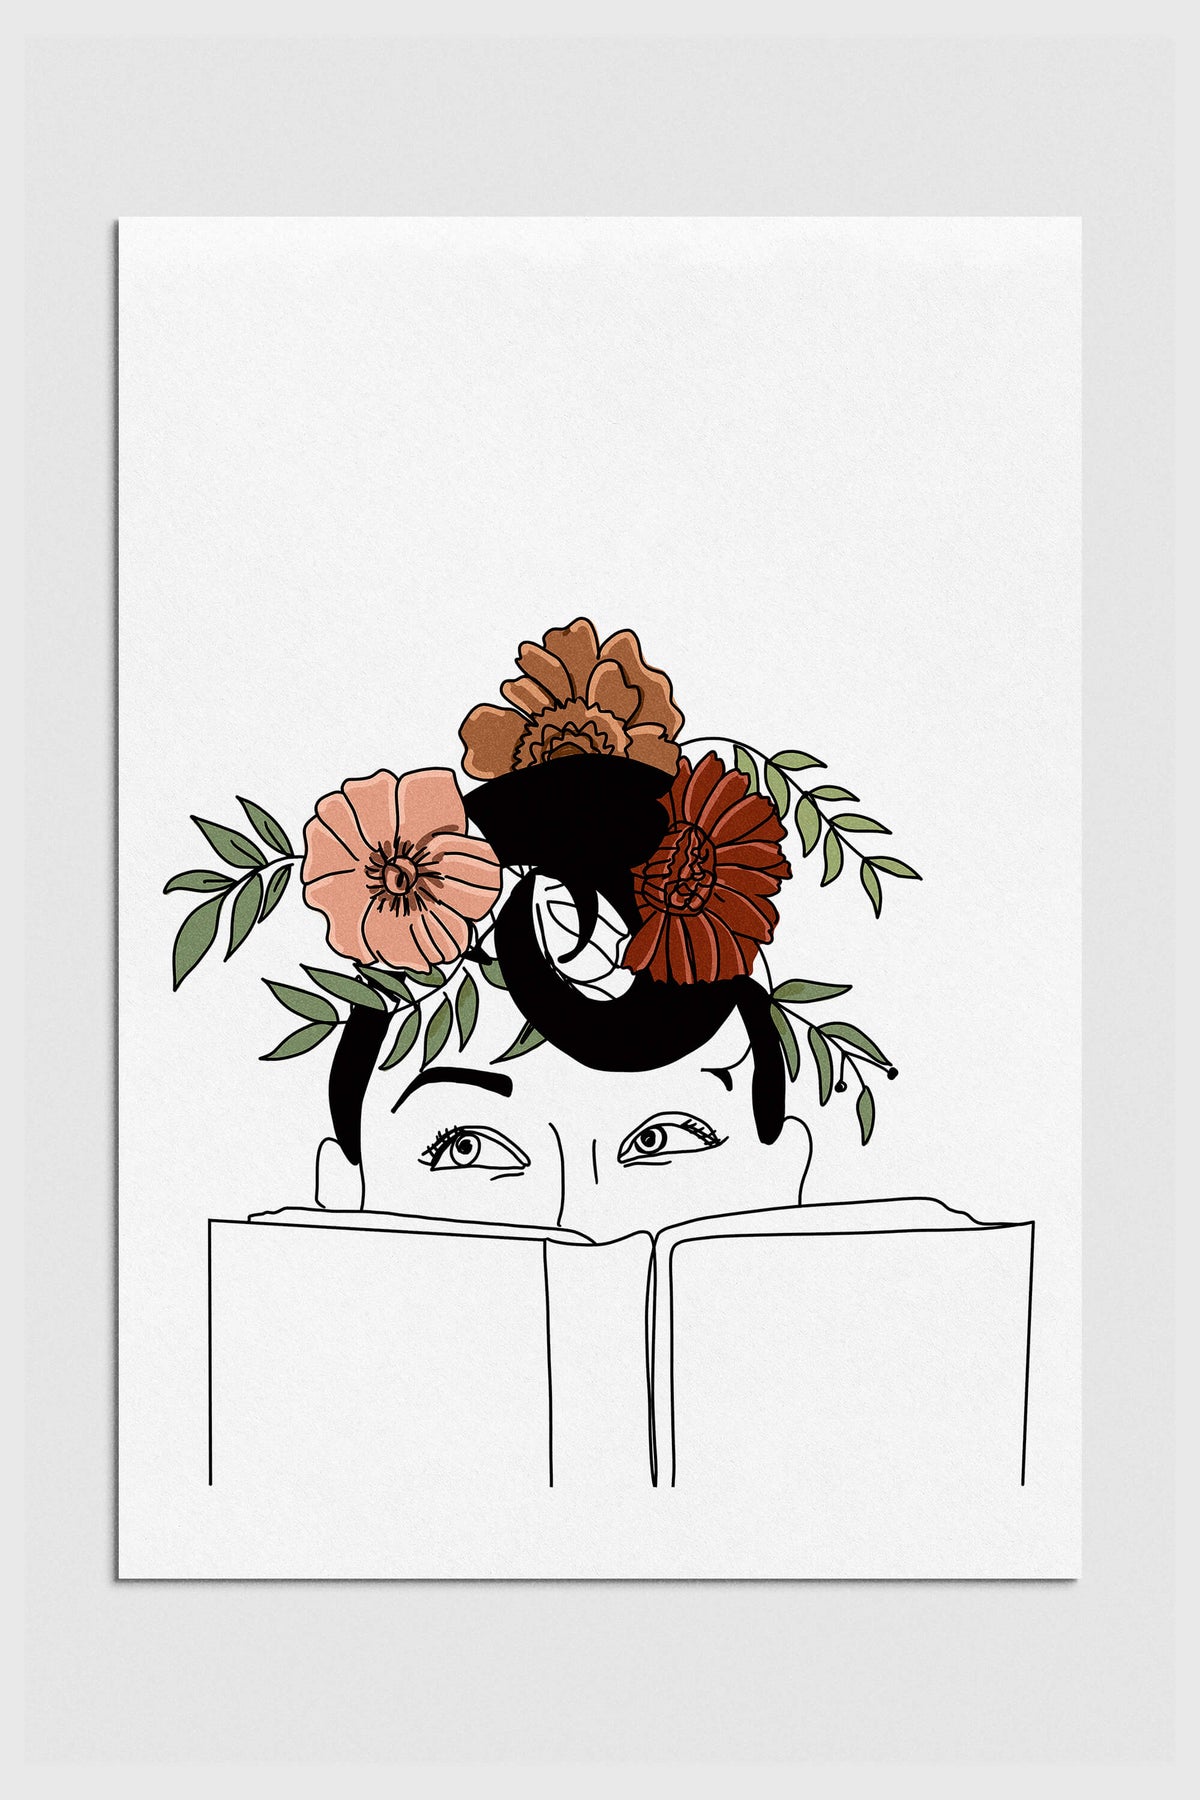 Art print of a serene woman with a floral head engrossed in reading a book, blending literature and nature in art.